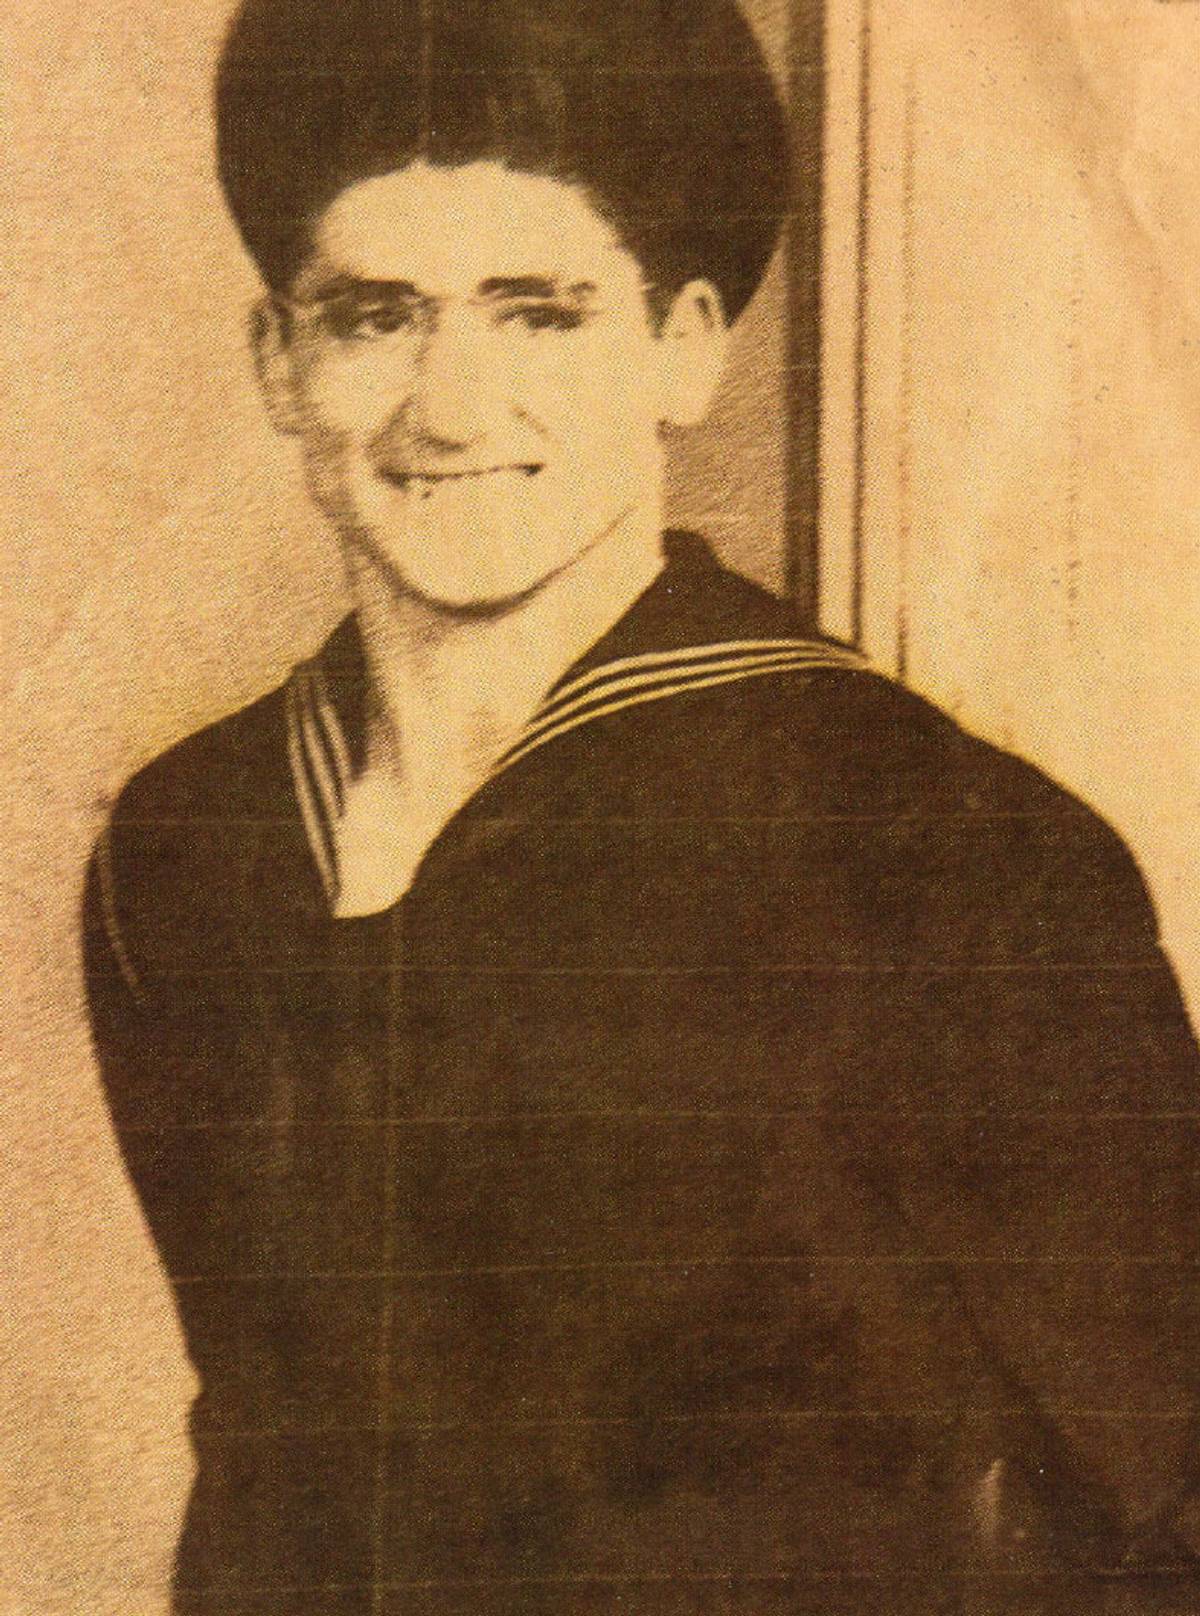 Louis Brown in Navy uniform in 1944. (Photo courtesy the author)